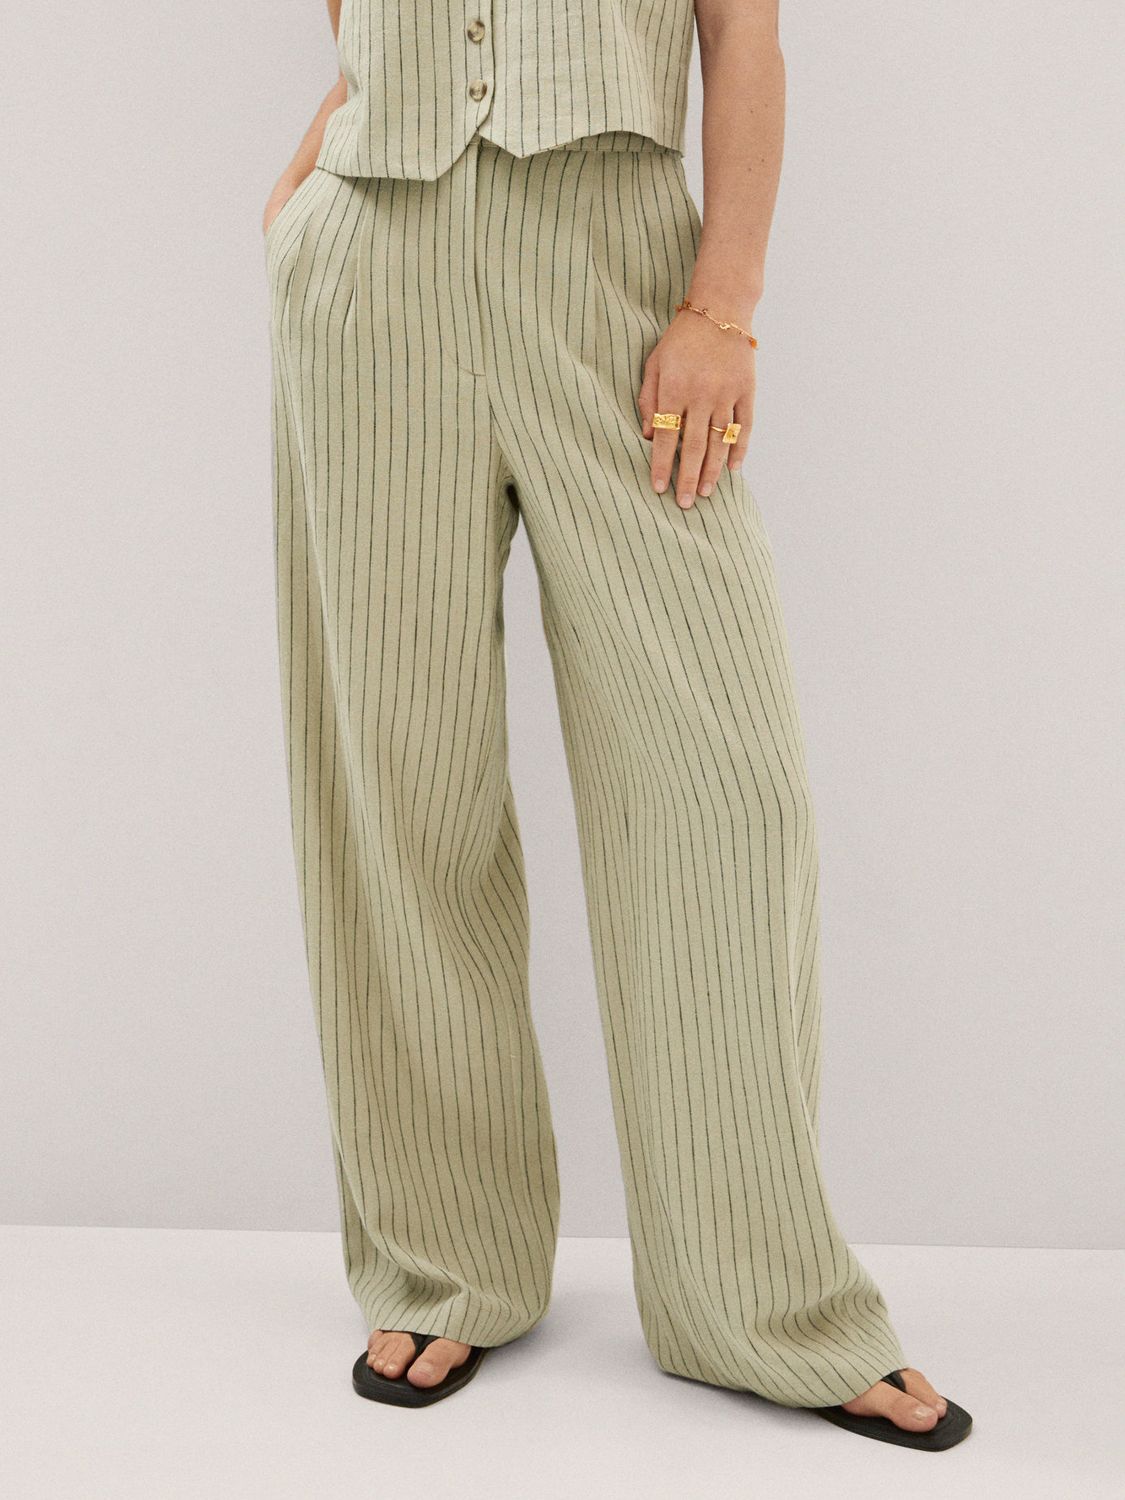 Linen Blend Tailored Pant in White